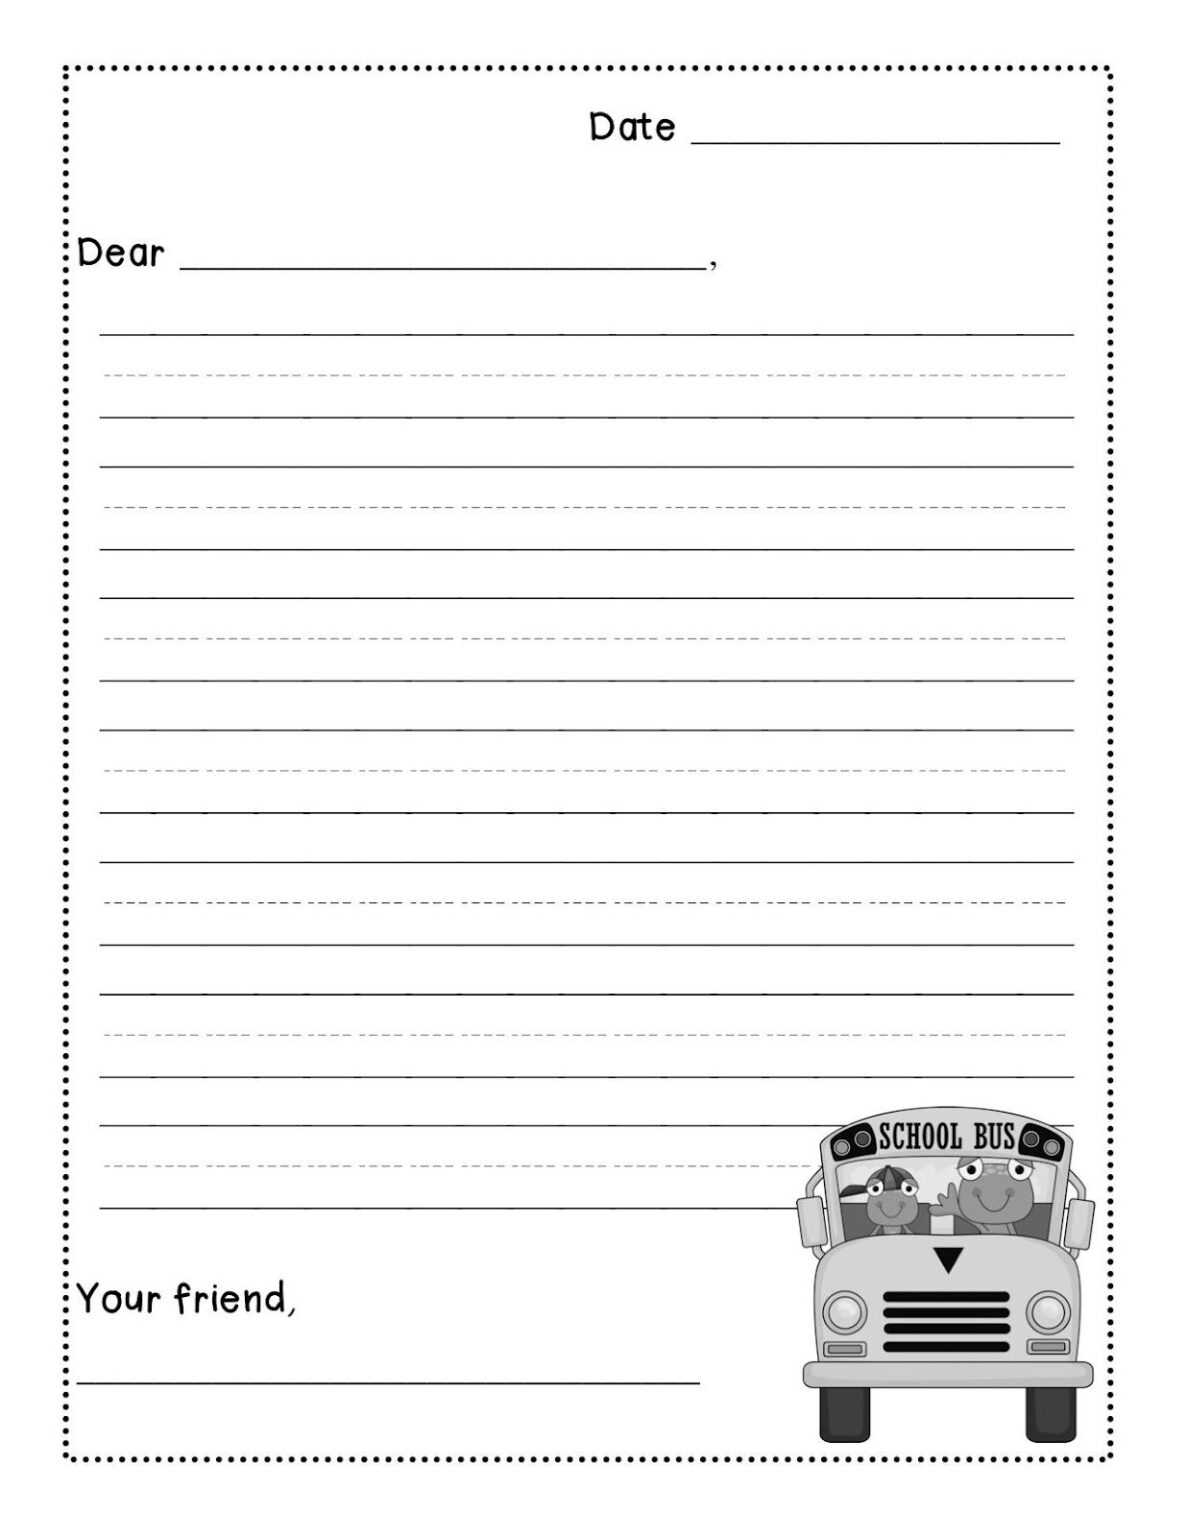 Writing A Letter Worksheets